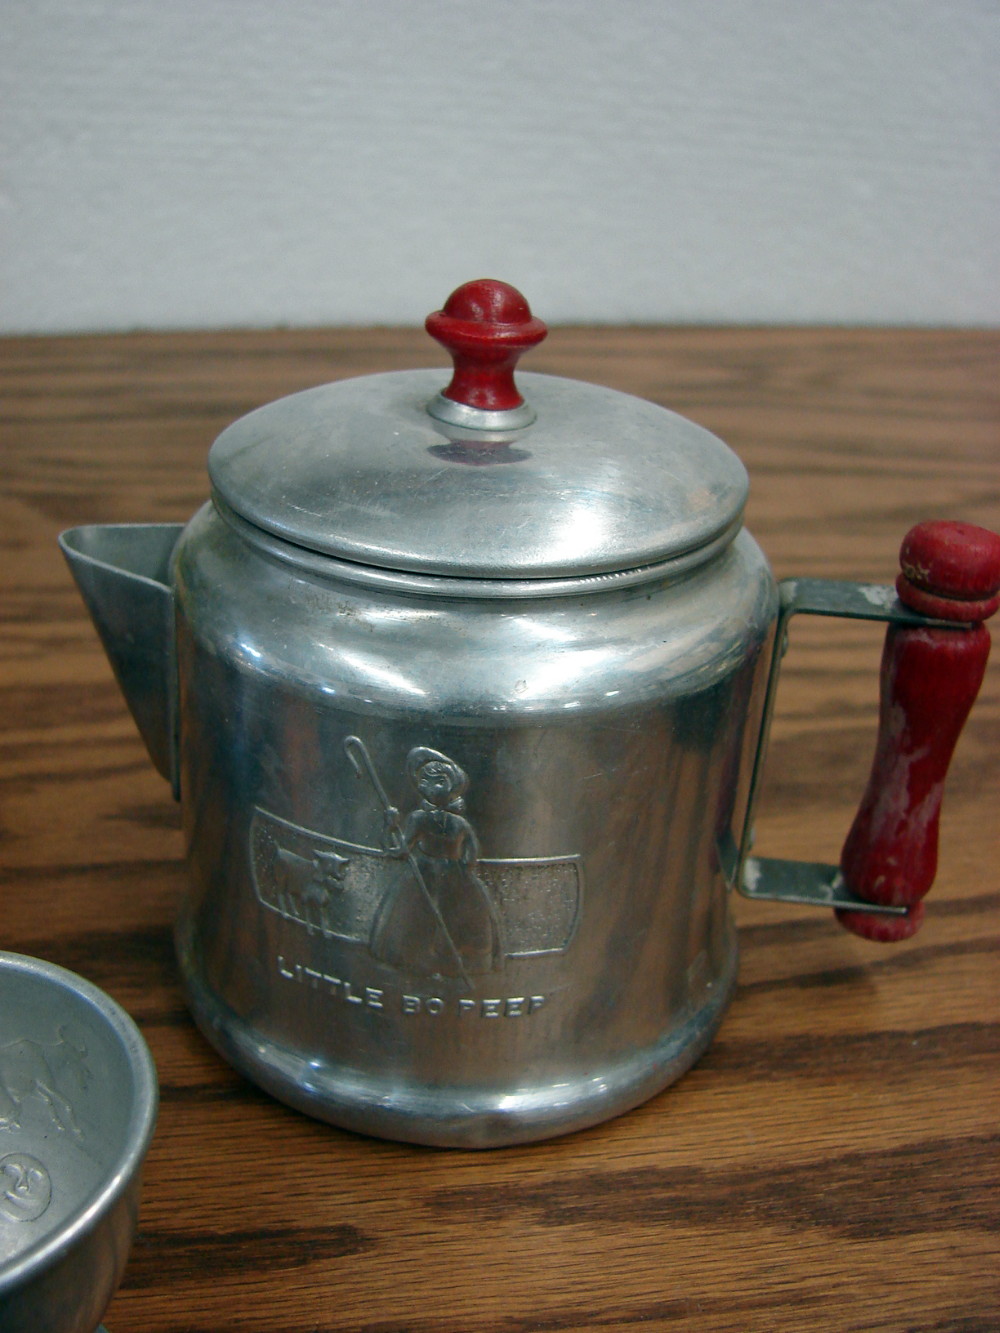 Aluminum Specialty Co. Child's Play Kitchen Coffee Pot Vintage Toy Children